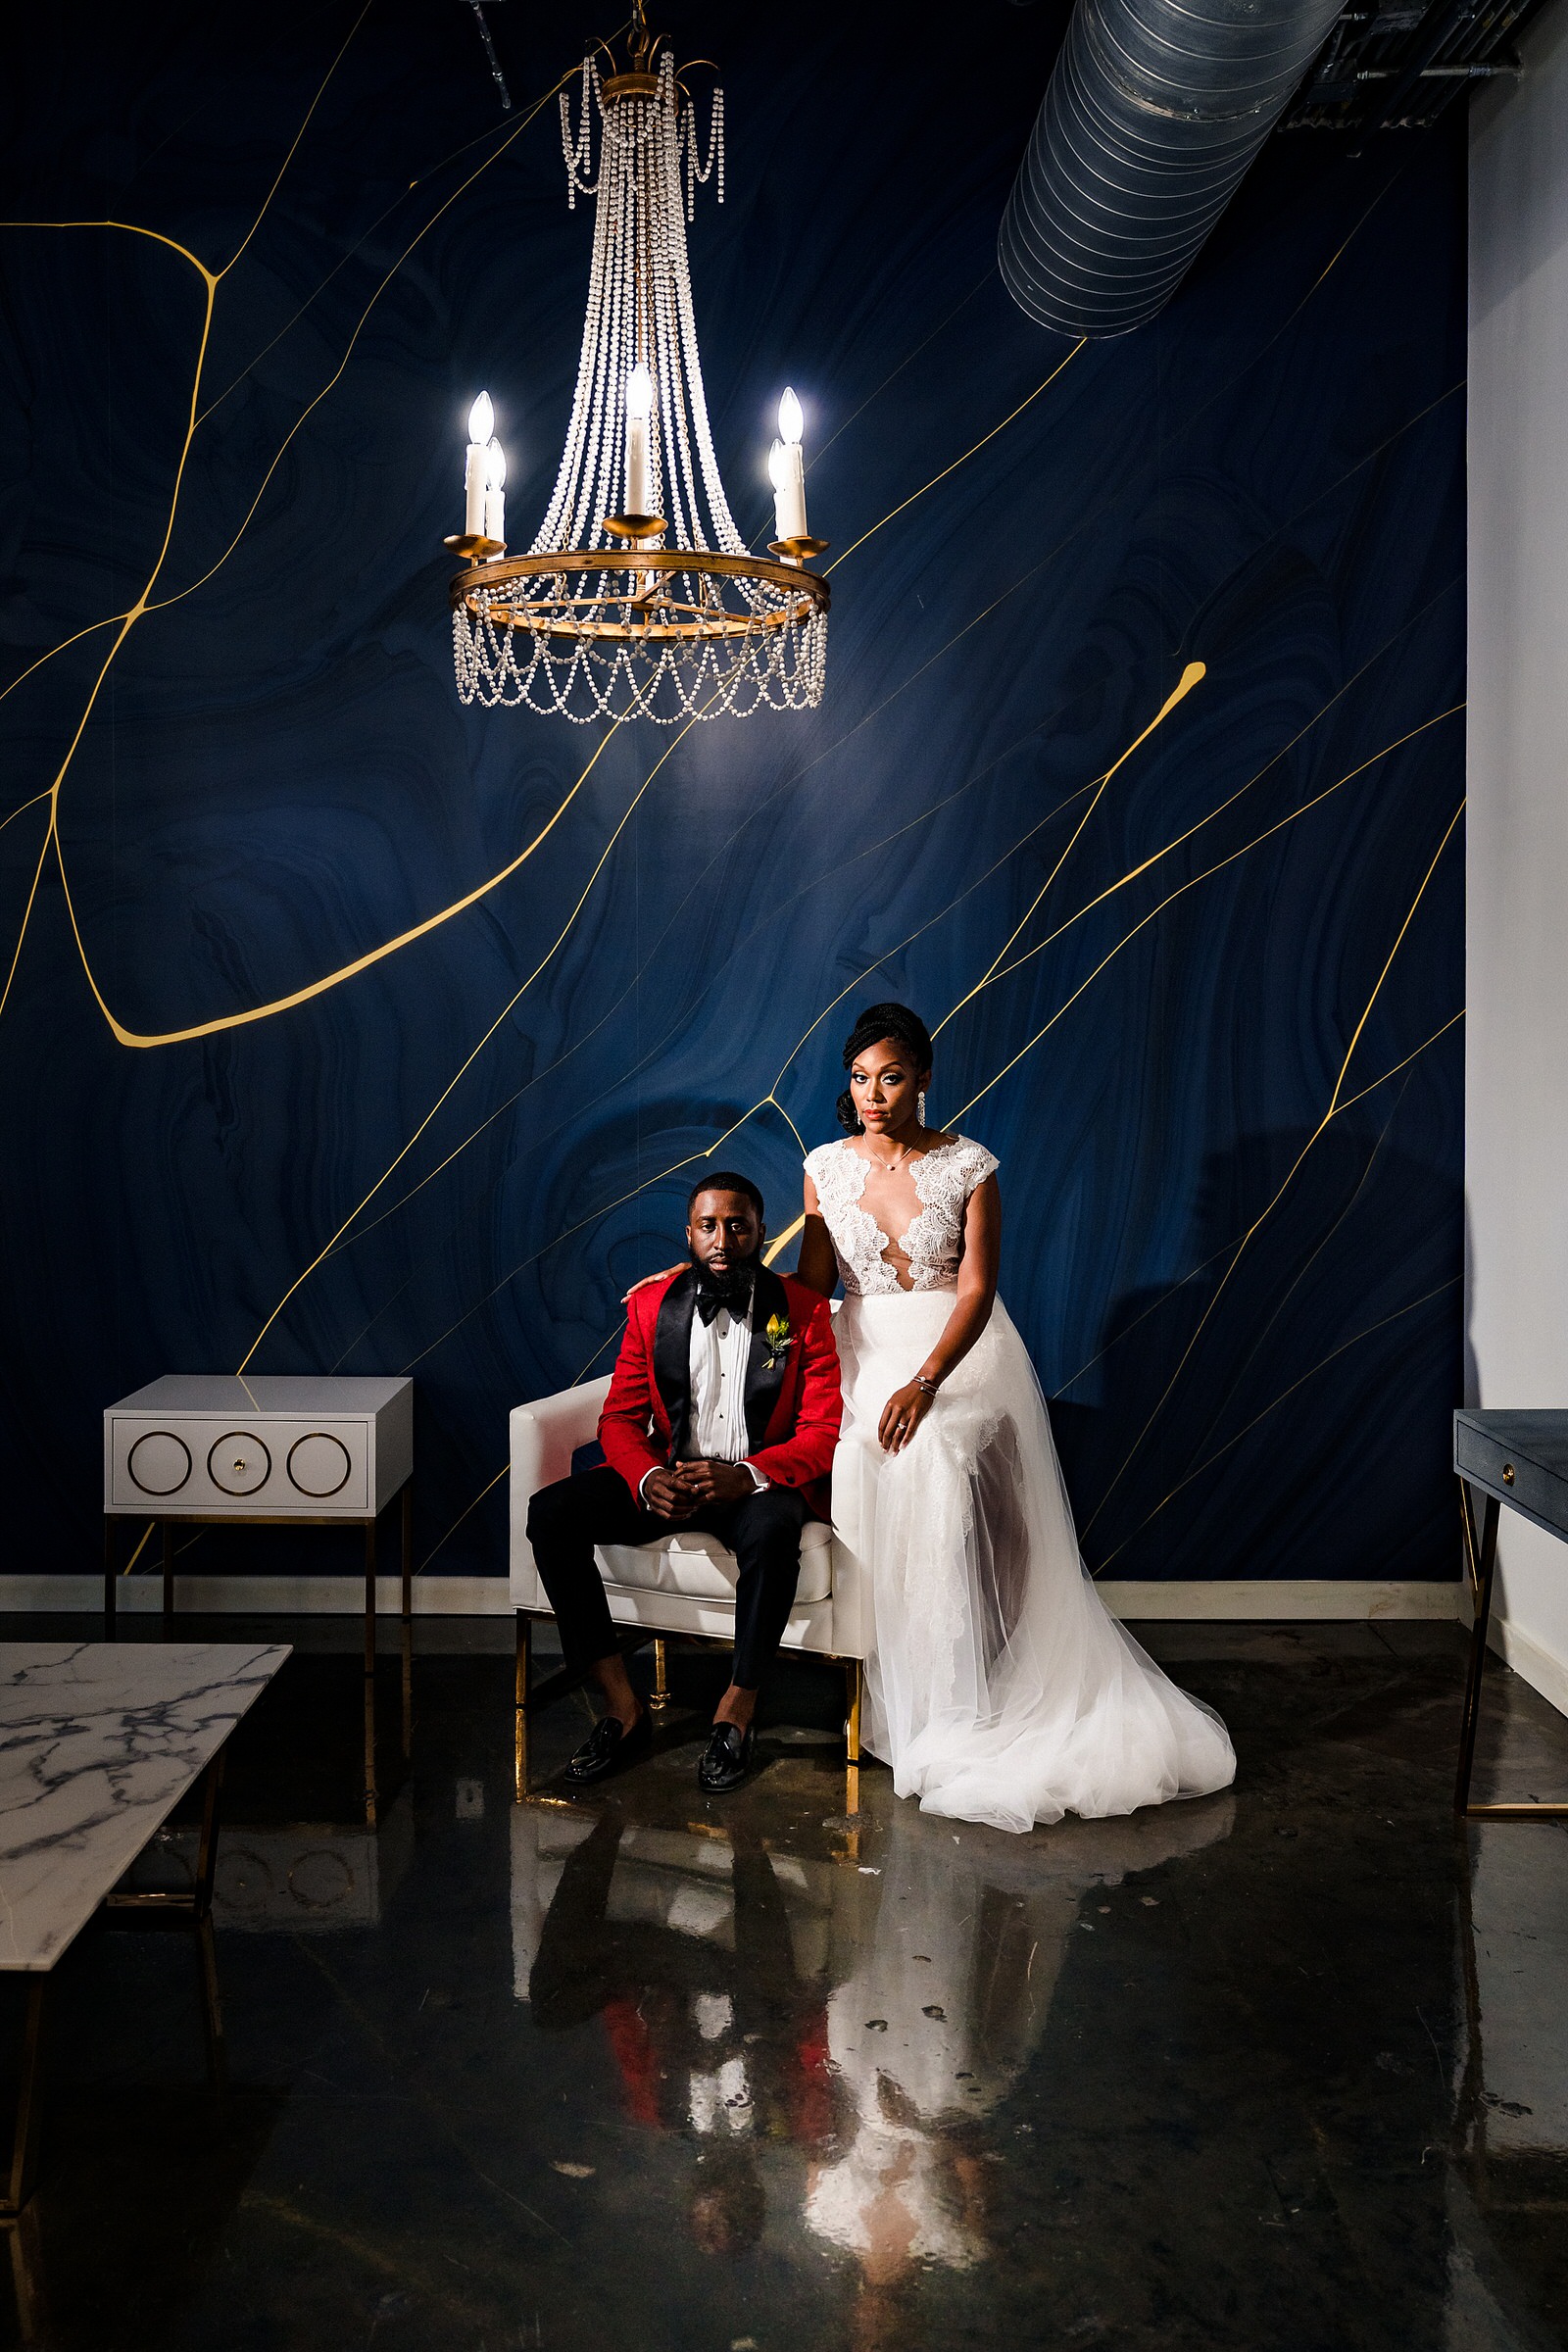 Groom in a Robert Jamison Collection custom suit and bride in a Gavin Christianson Bridal gown pose in the bridal suite at the Cotton Room